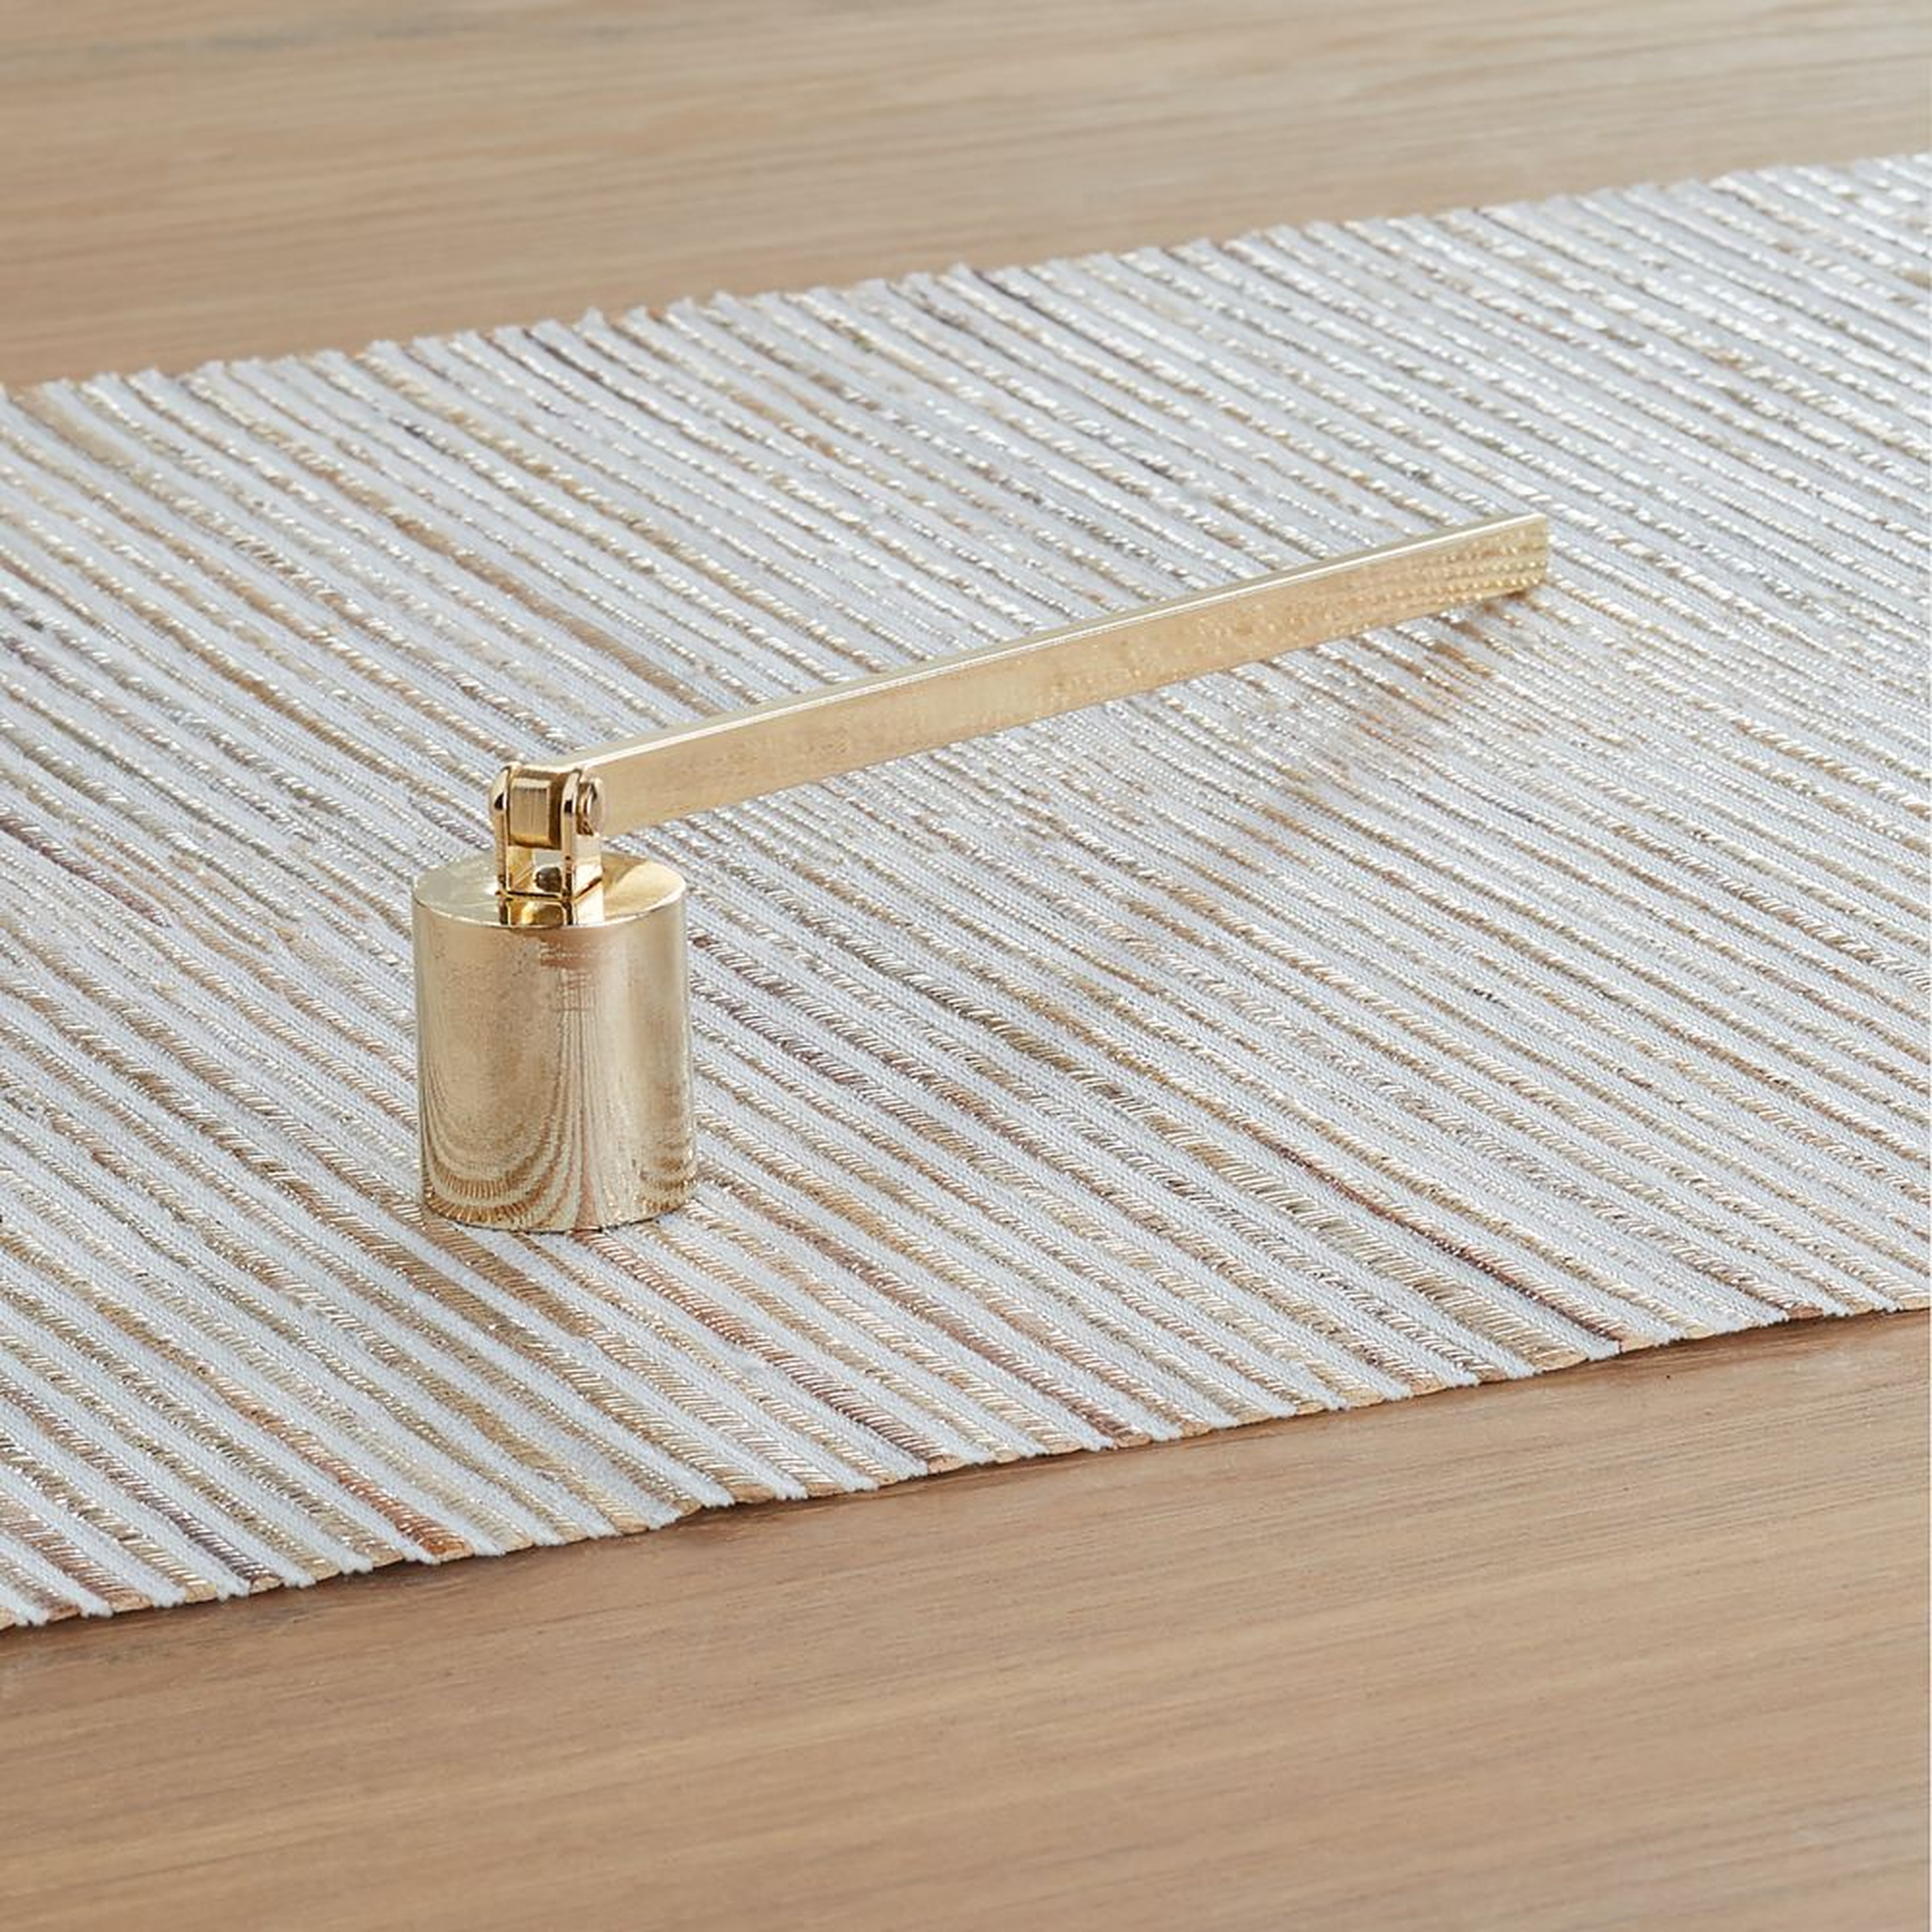 ILLUME ® Gold Candle Snuffer - Crate and Barrel